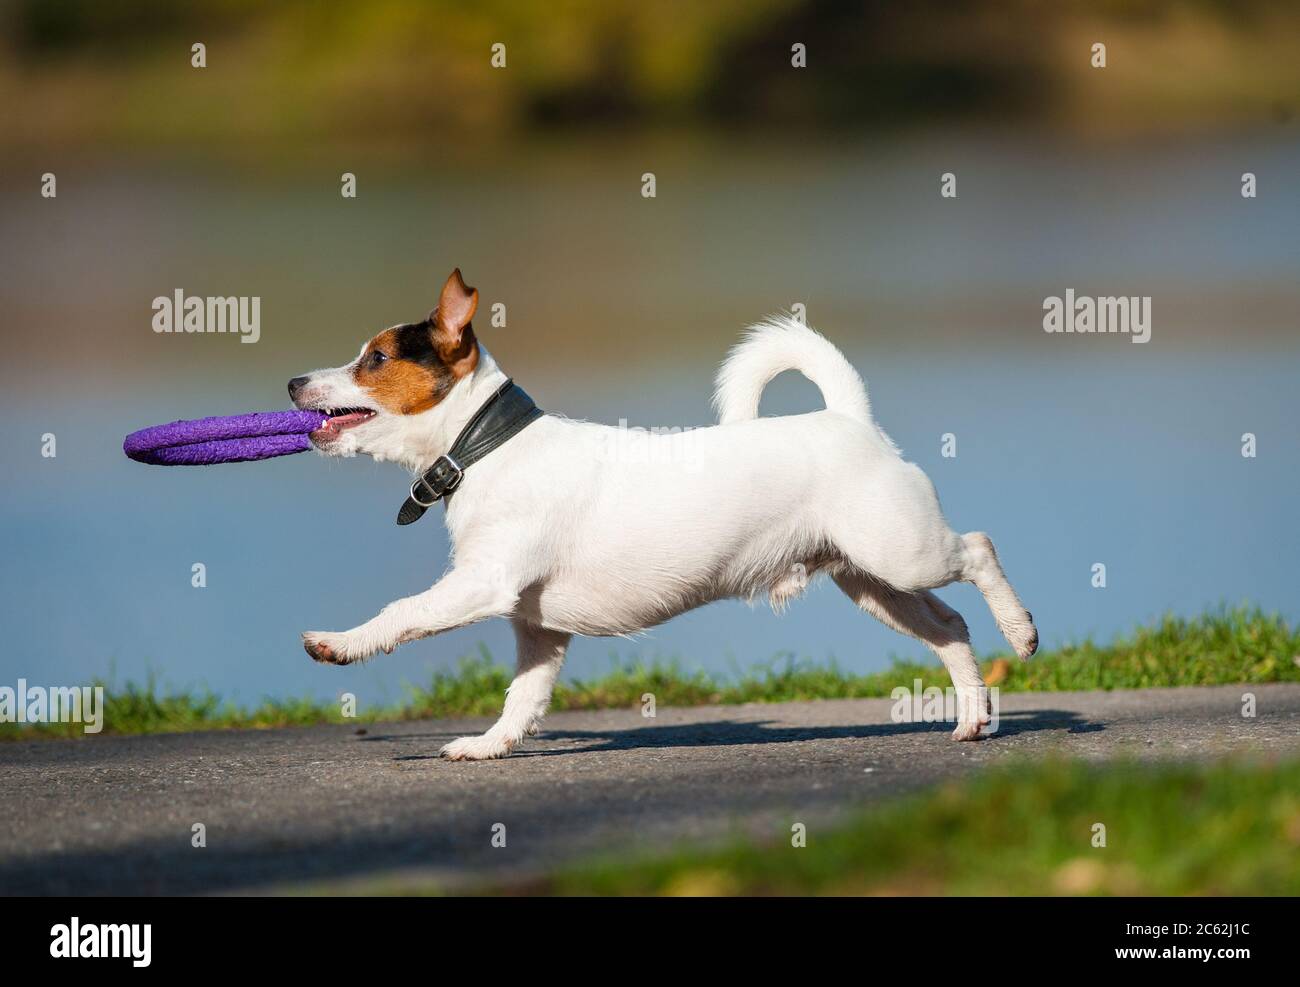 Cute jack russel dog running with toy in teeth Stock Photo